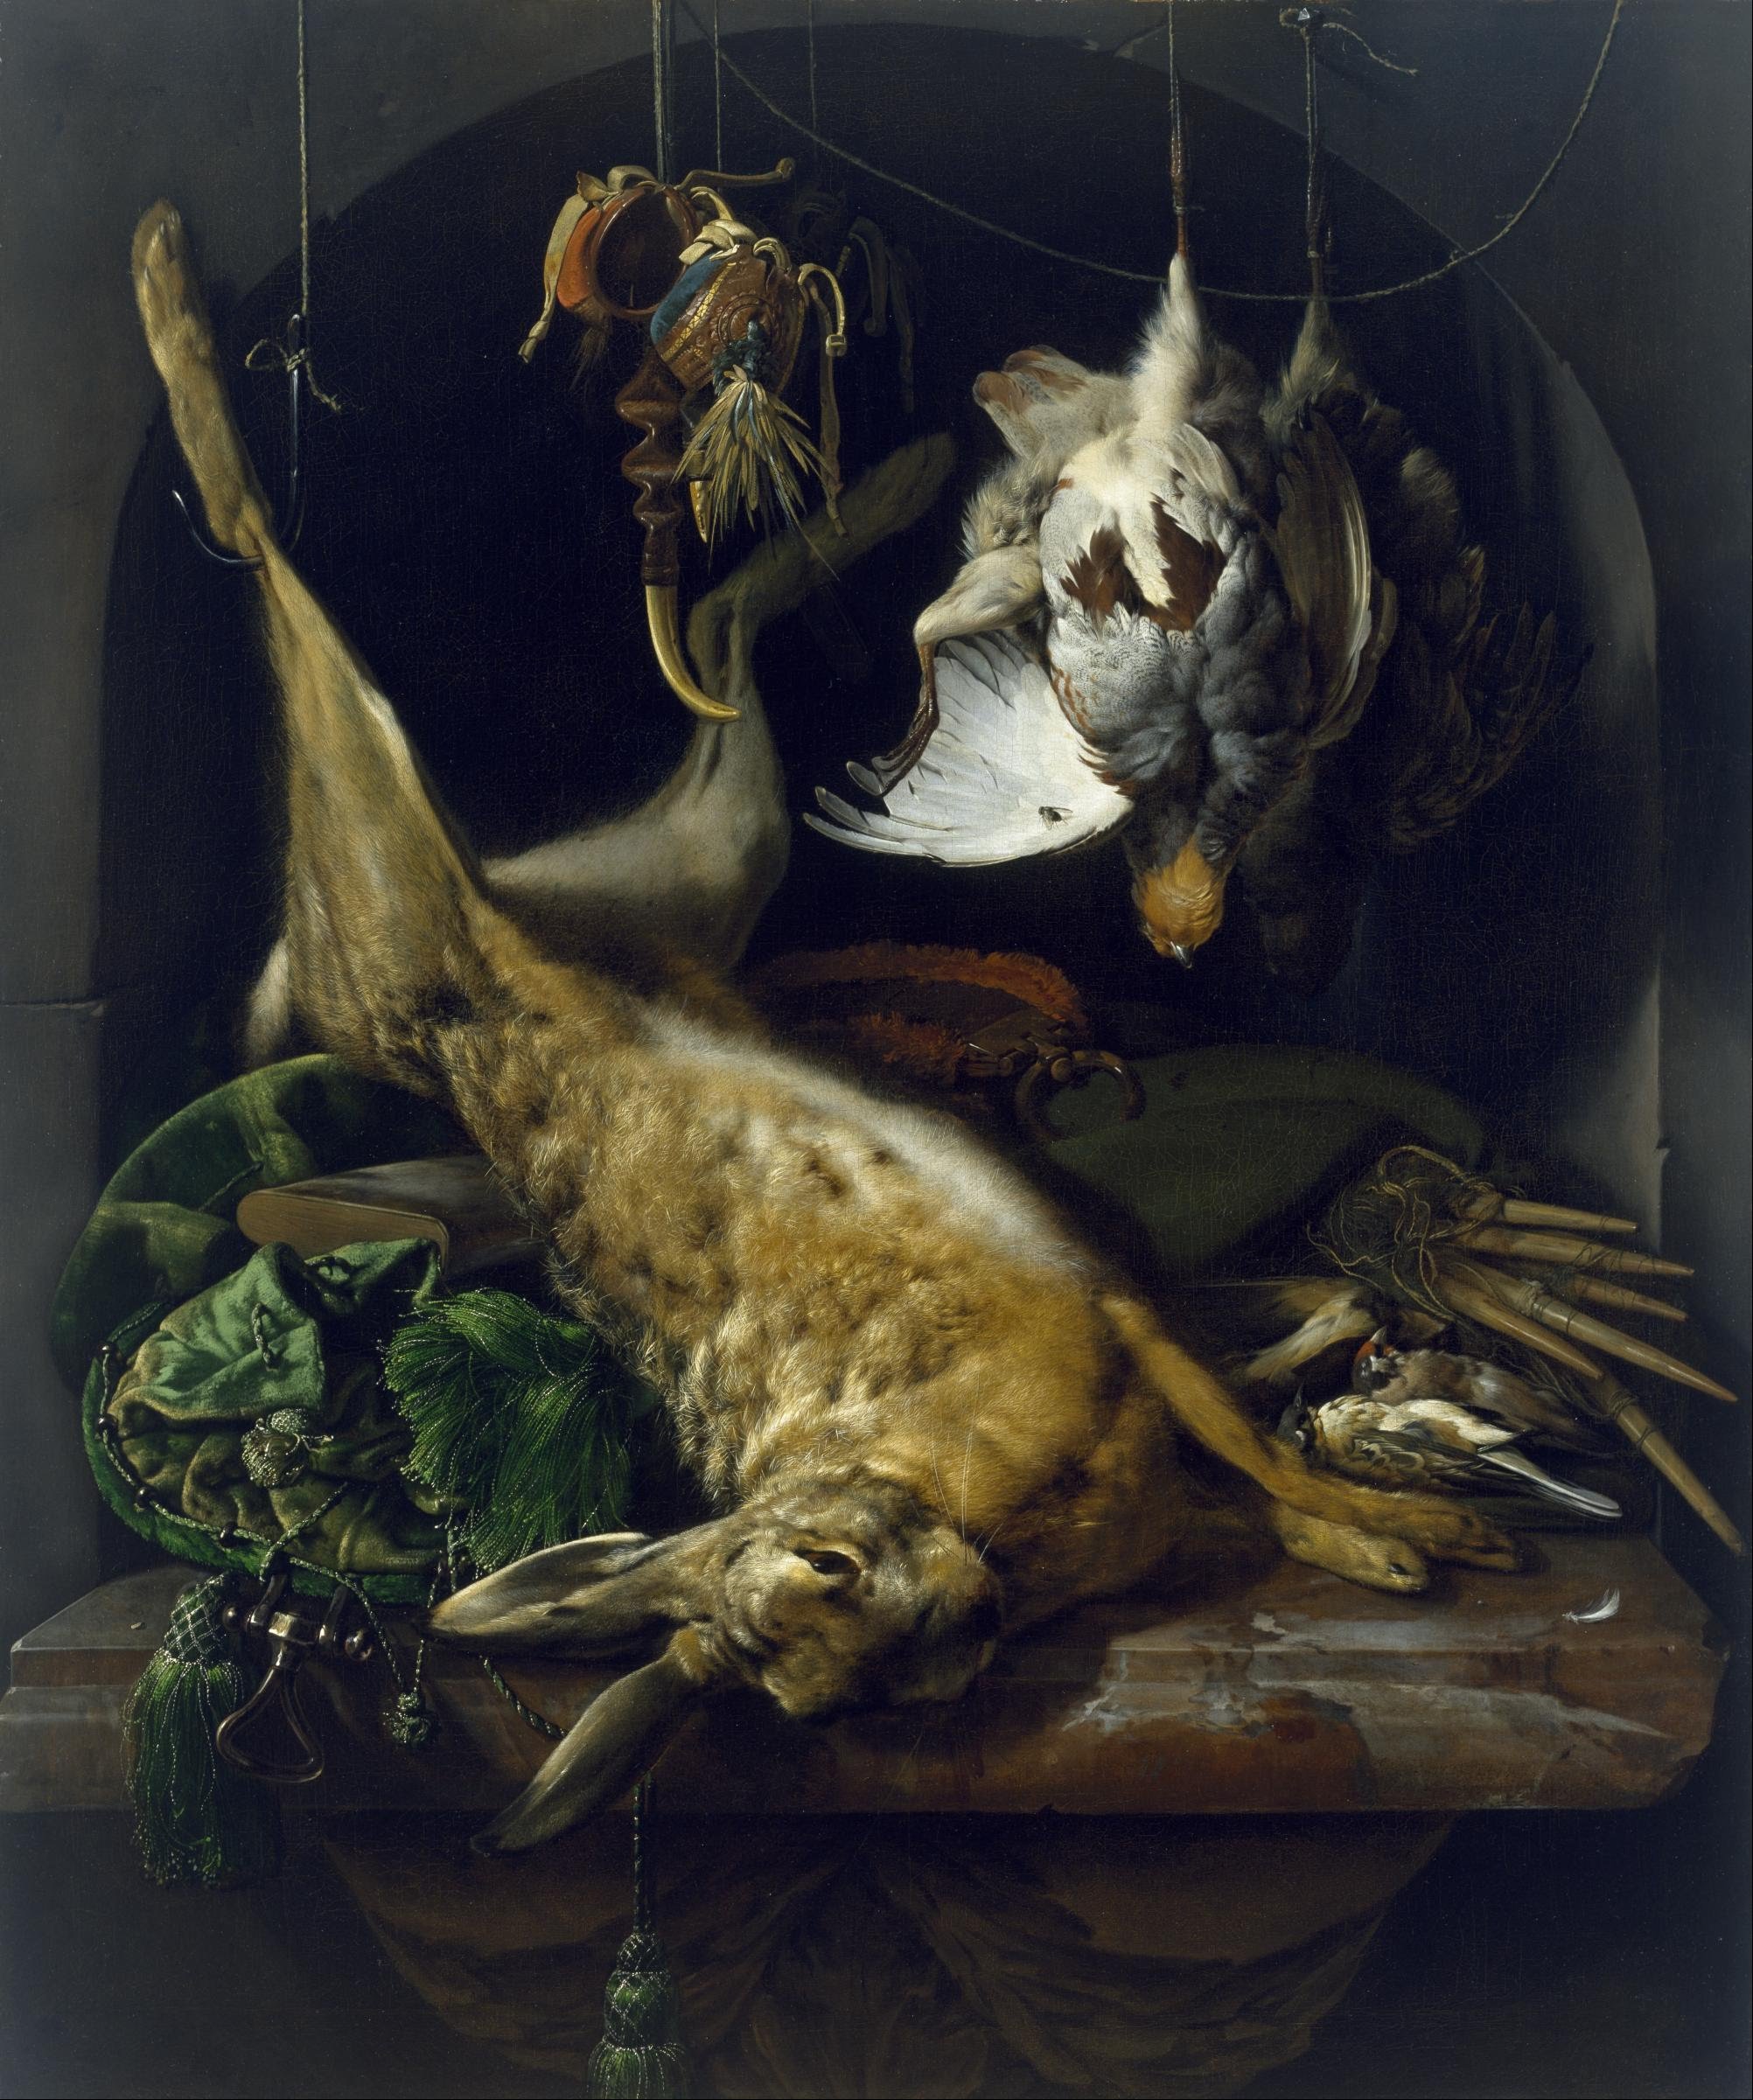 Jan_Weenix_-_Still_Life_of_a_Dead_Hare,_Partridges,_and_Other_Birds_in_a_Niche_-_Google_Art_Project.jpeg